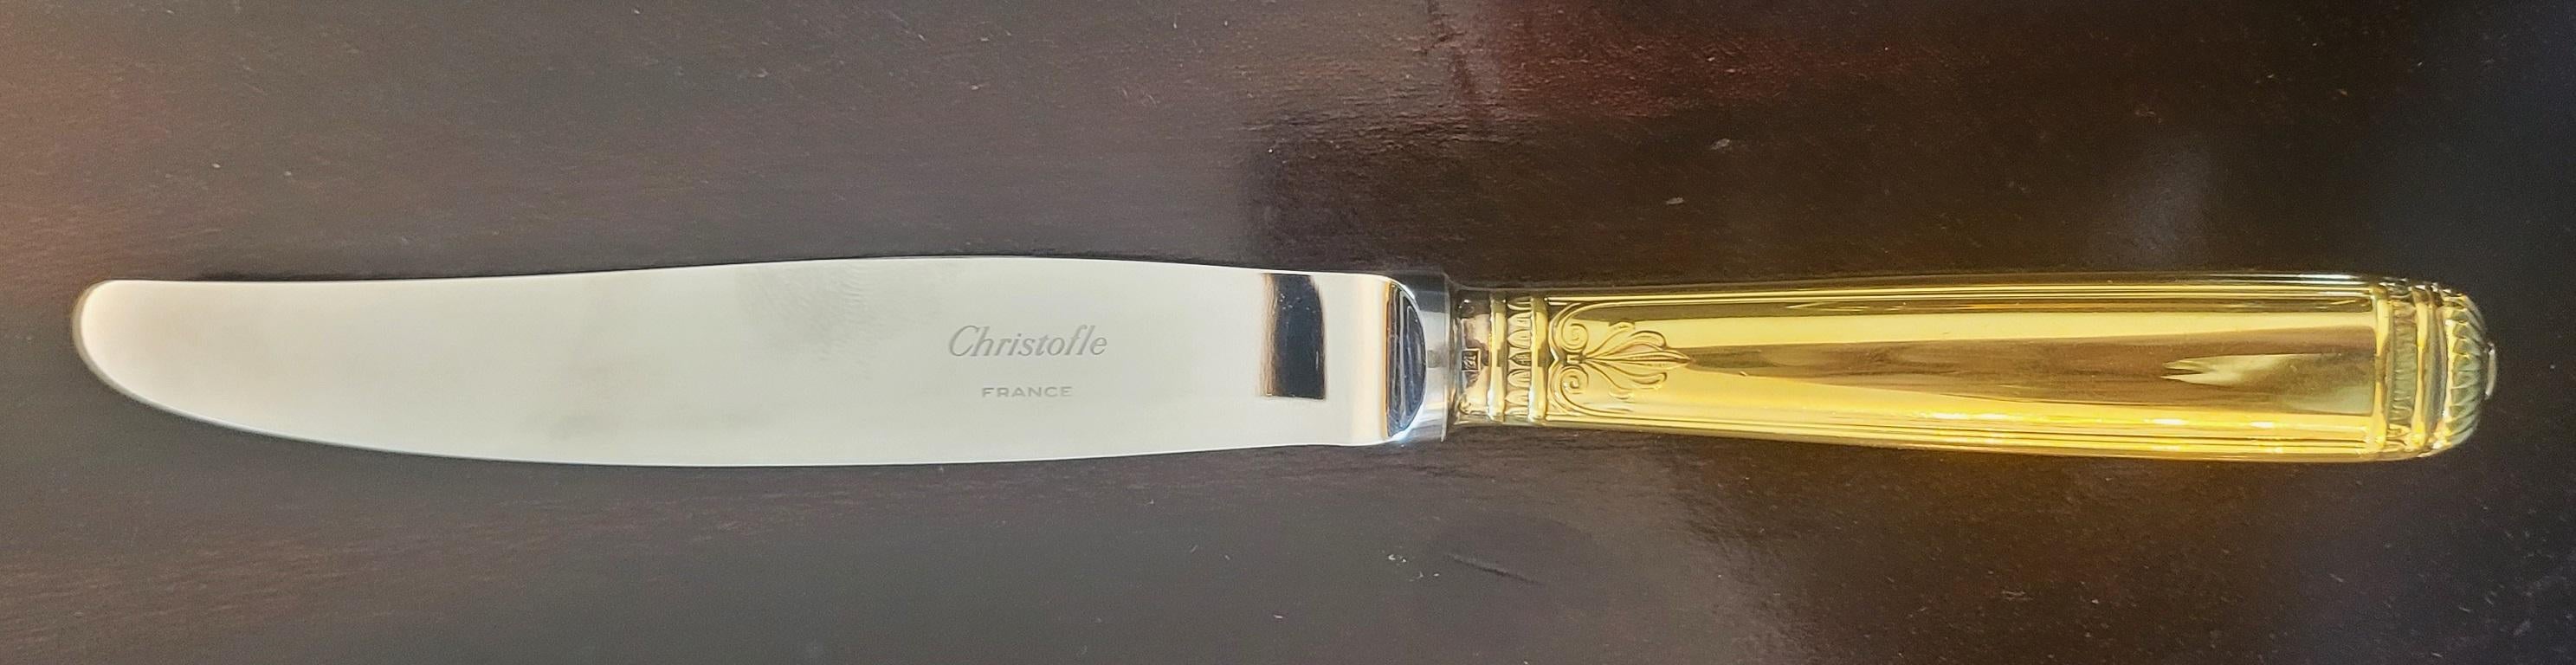 Malmaison by Christofle Silver and Gold Plated 75 Piece Service 2